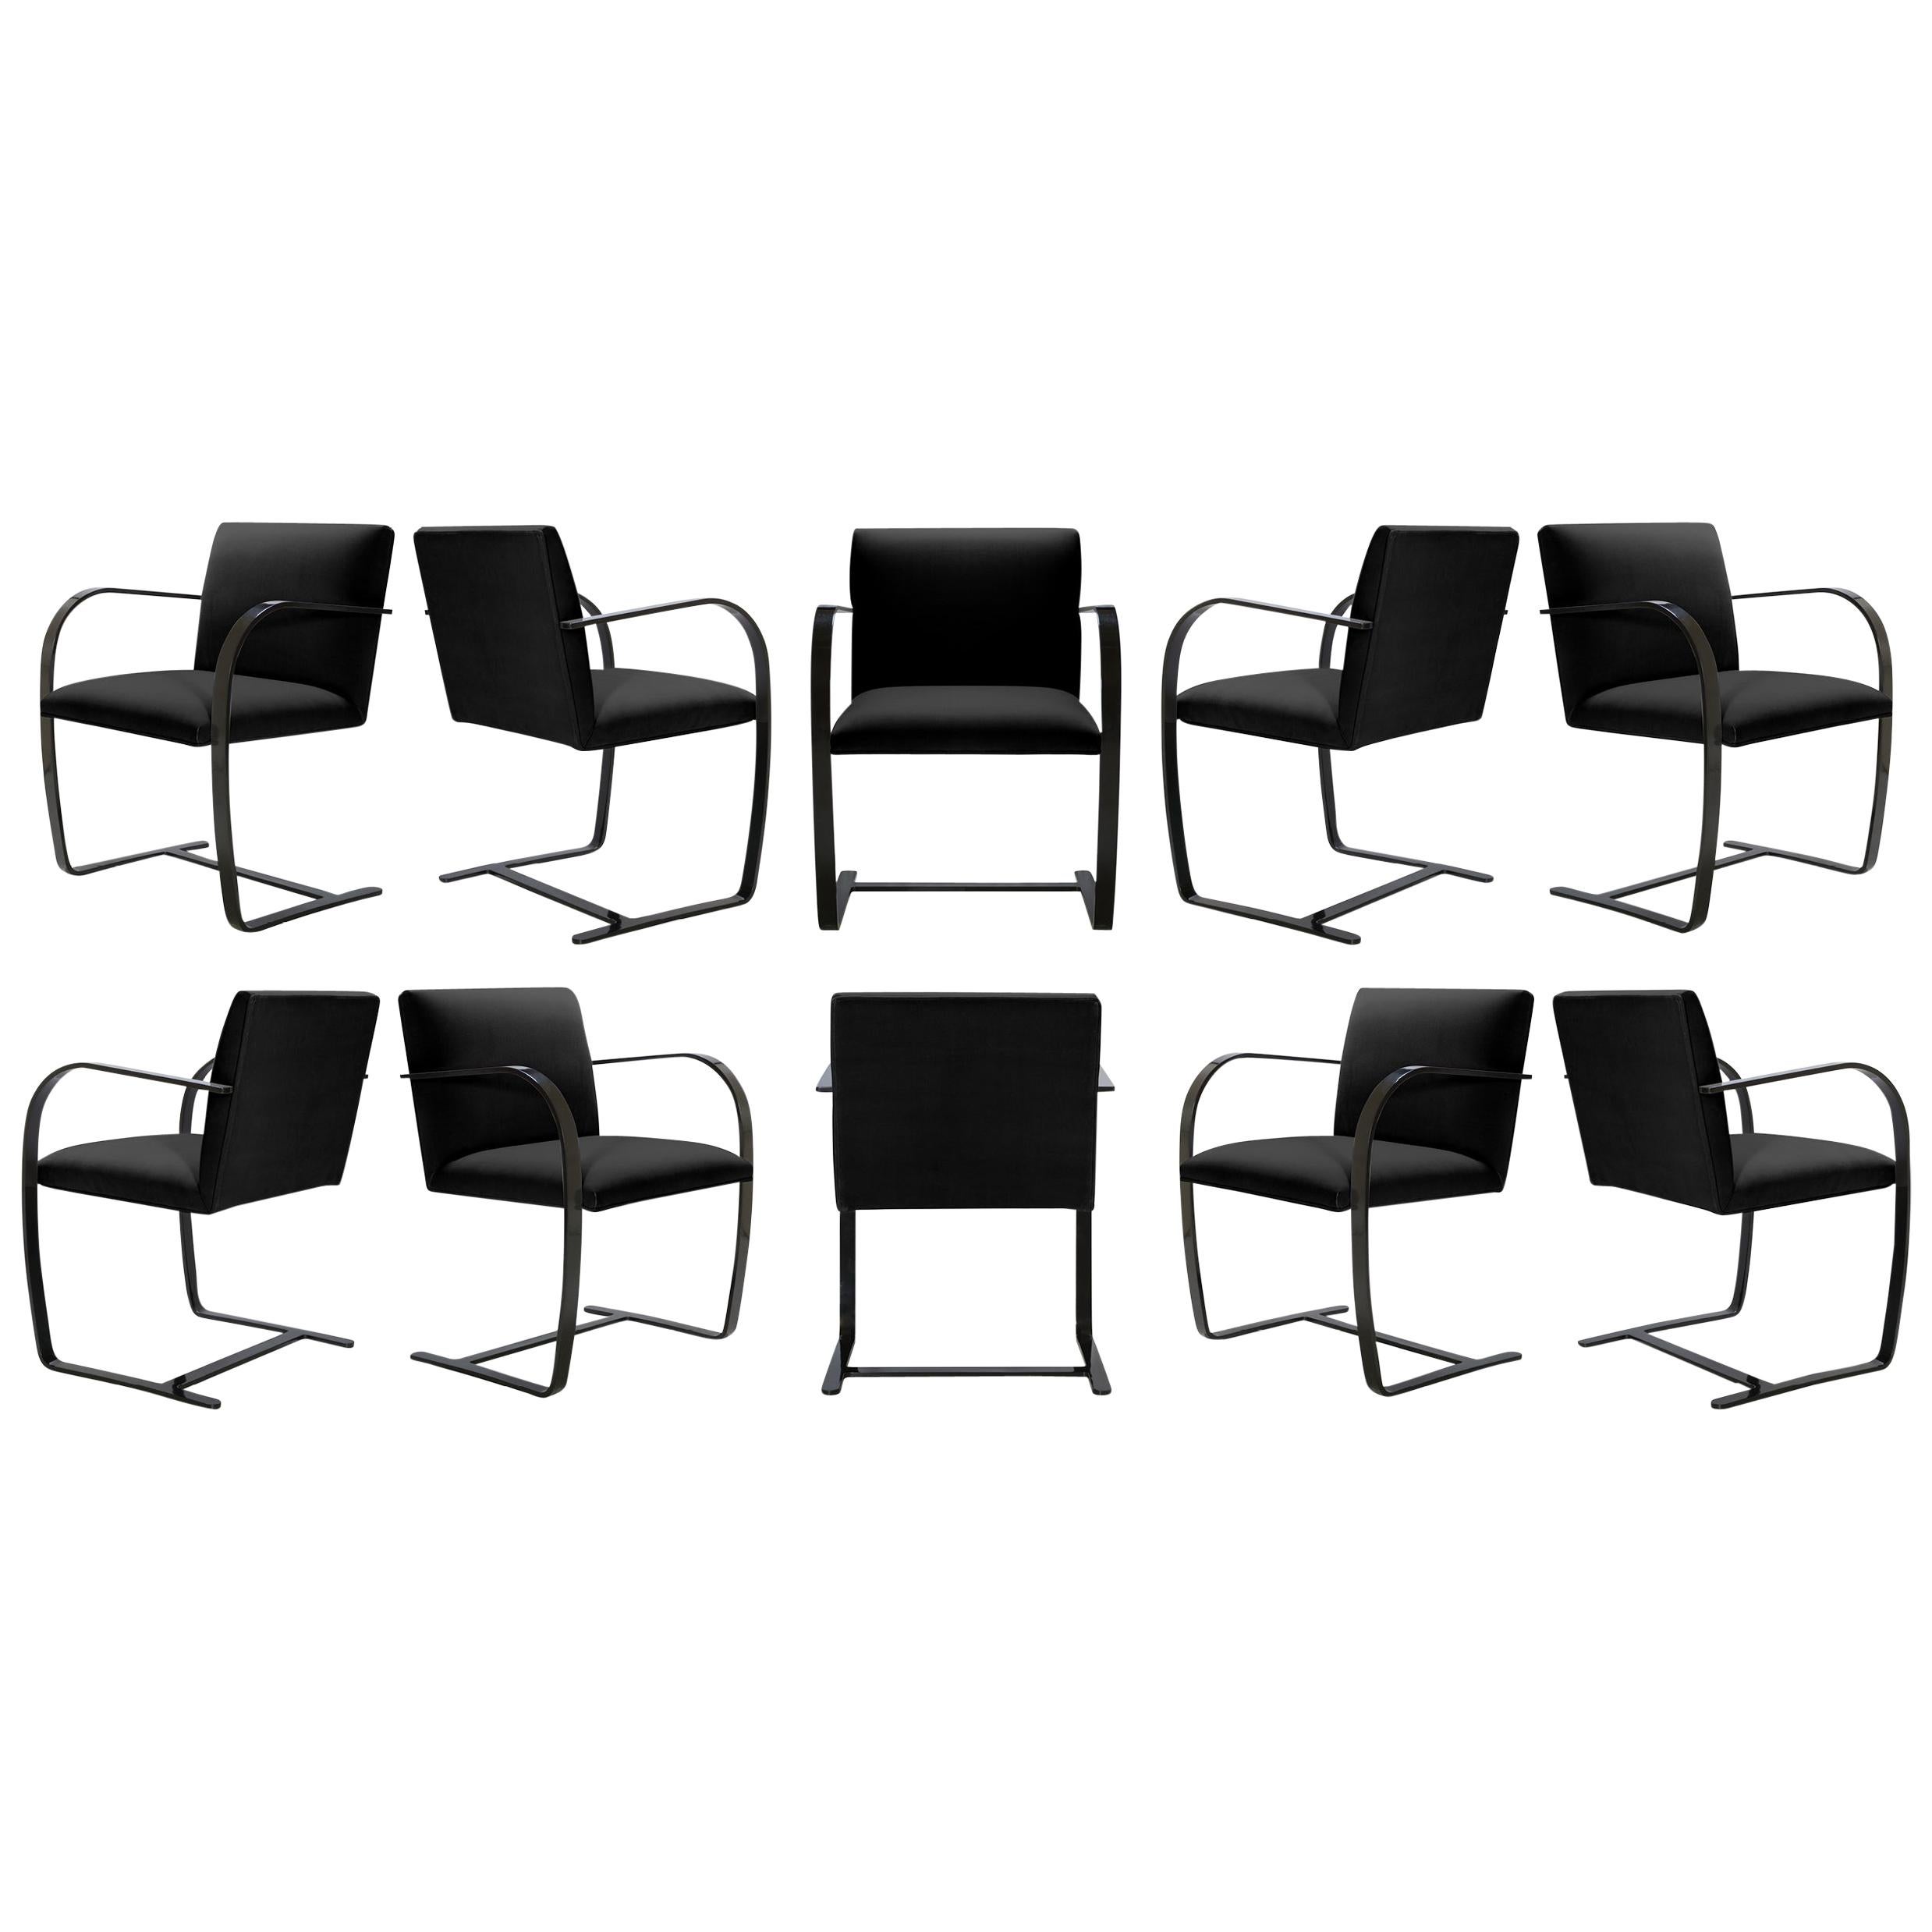 Brno Flat-Bar Chairs Velvet, Obsidian Gloss by Mies van der Rohe for Knoll, 10